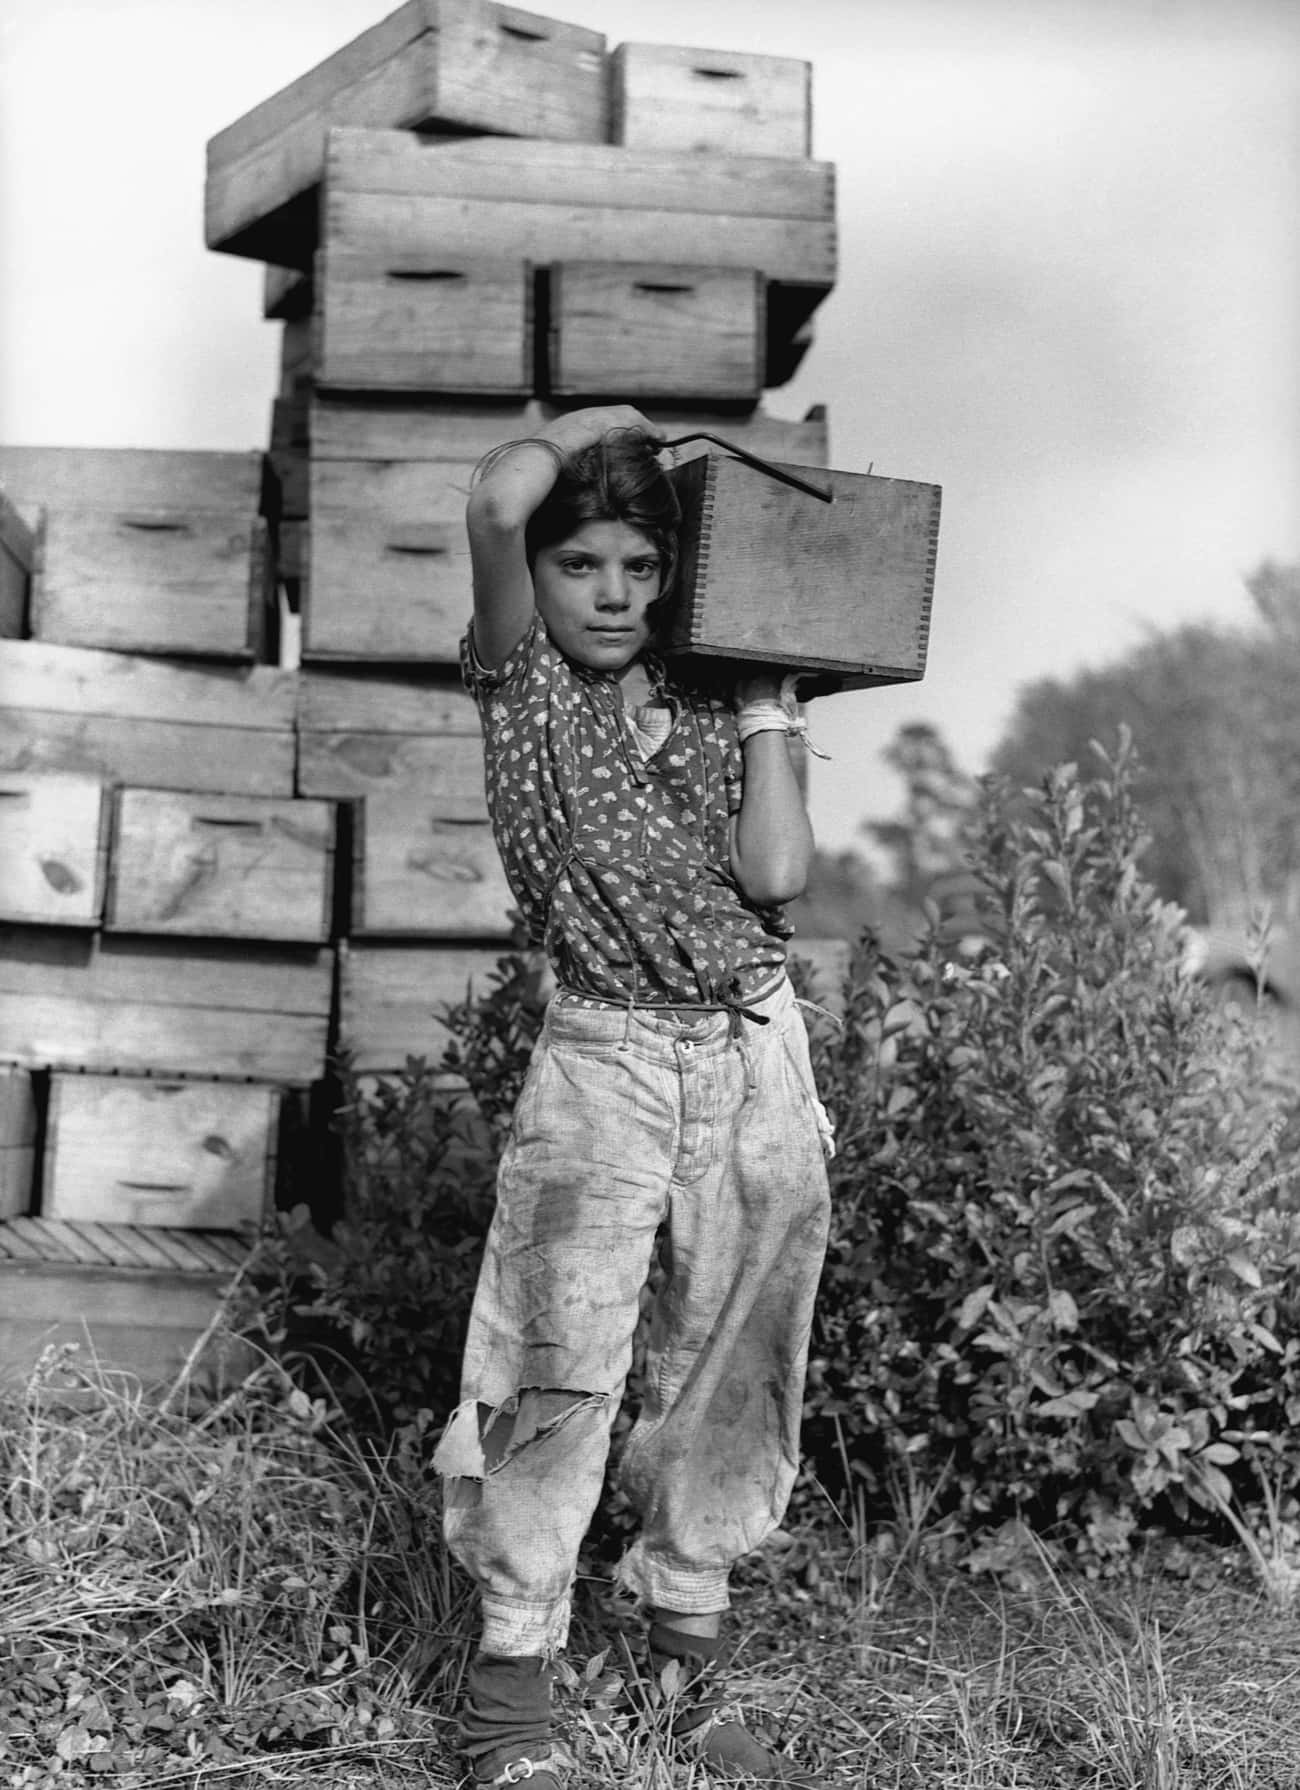 A Migrant Girl Carries A Box Of Cranberries In Burlington County, NJ, 1938